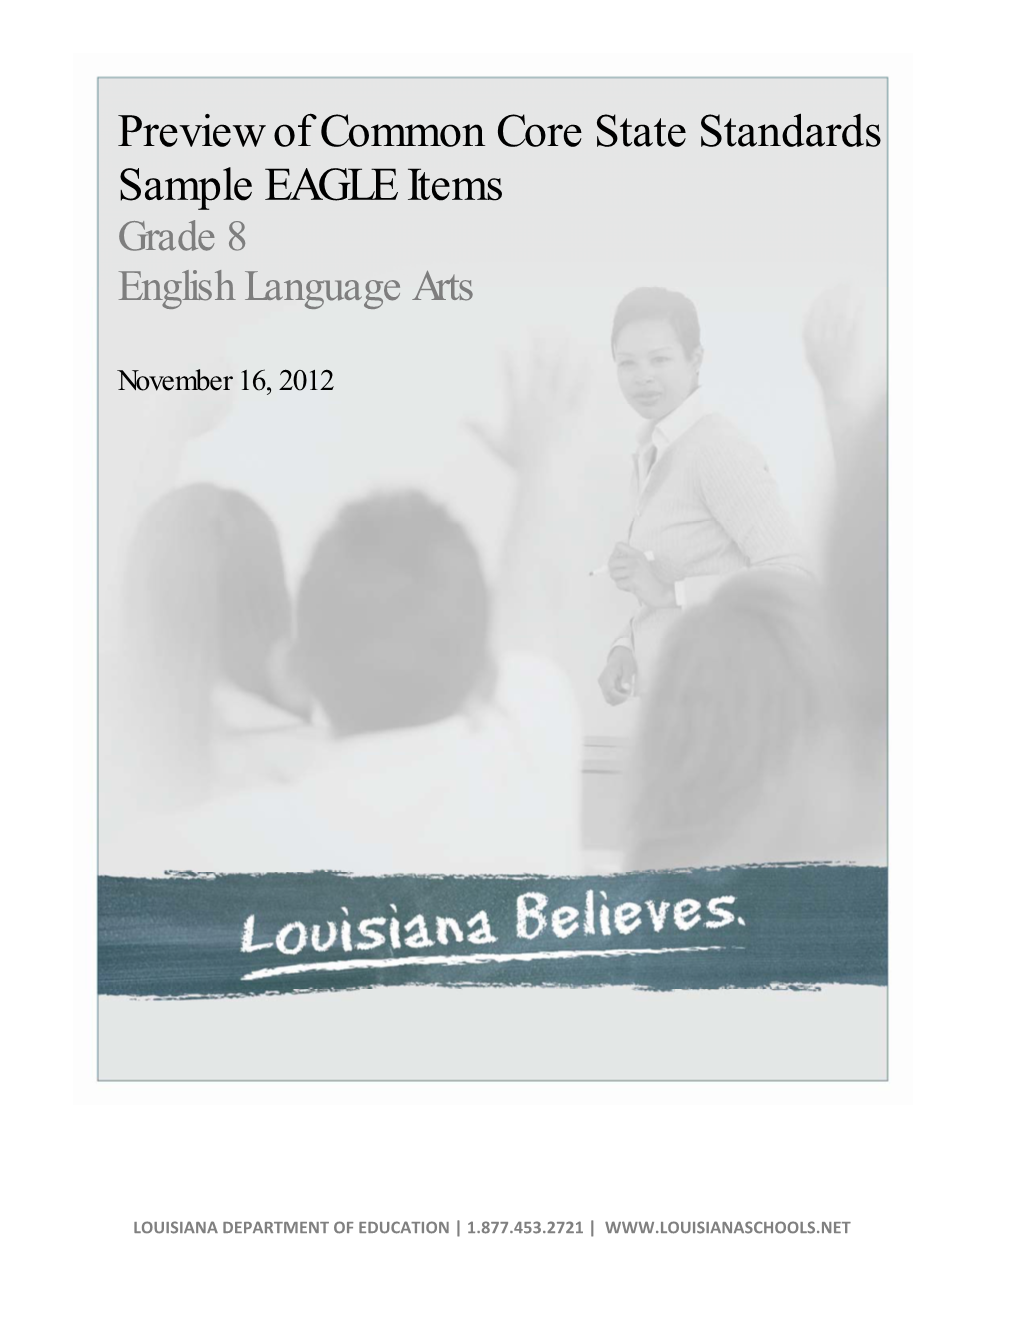 Preview of Common Core State Standards Sample EAGLE Items Grade 8 English Language Arts